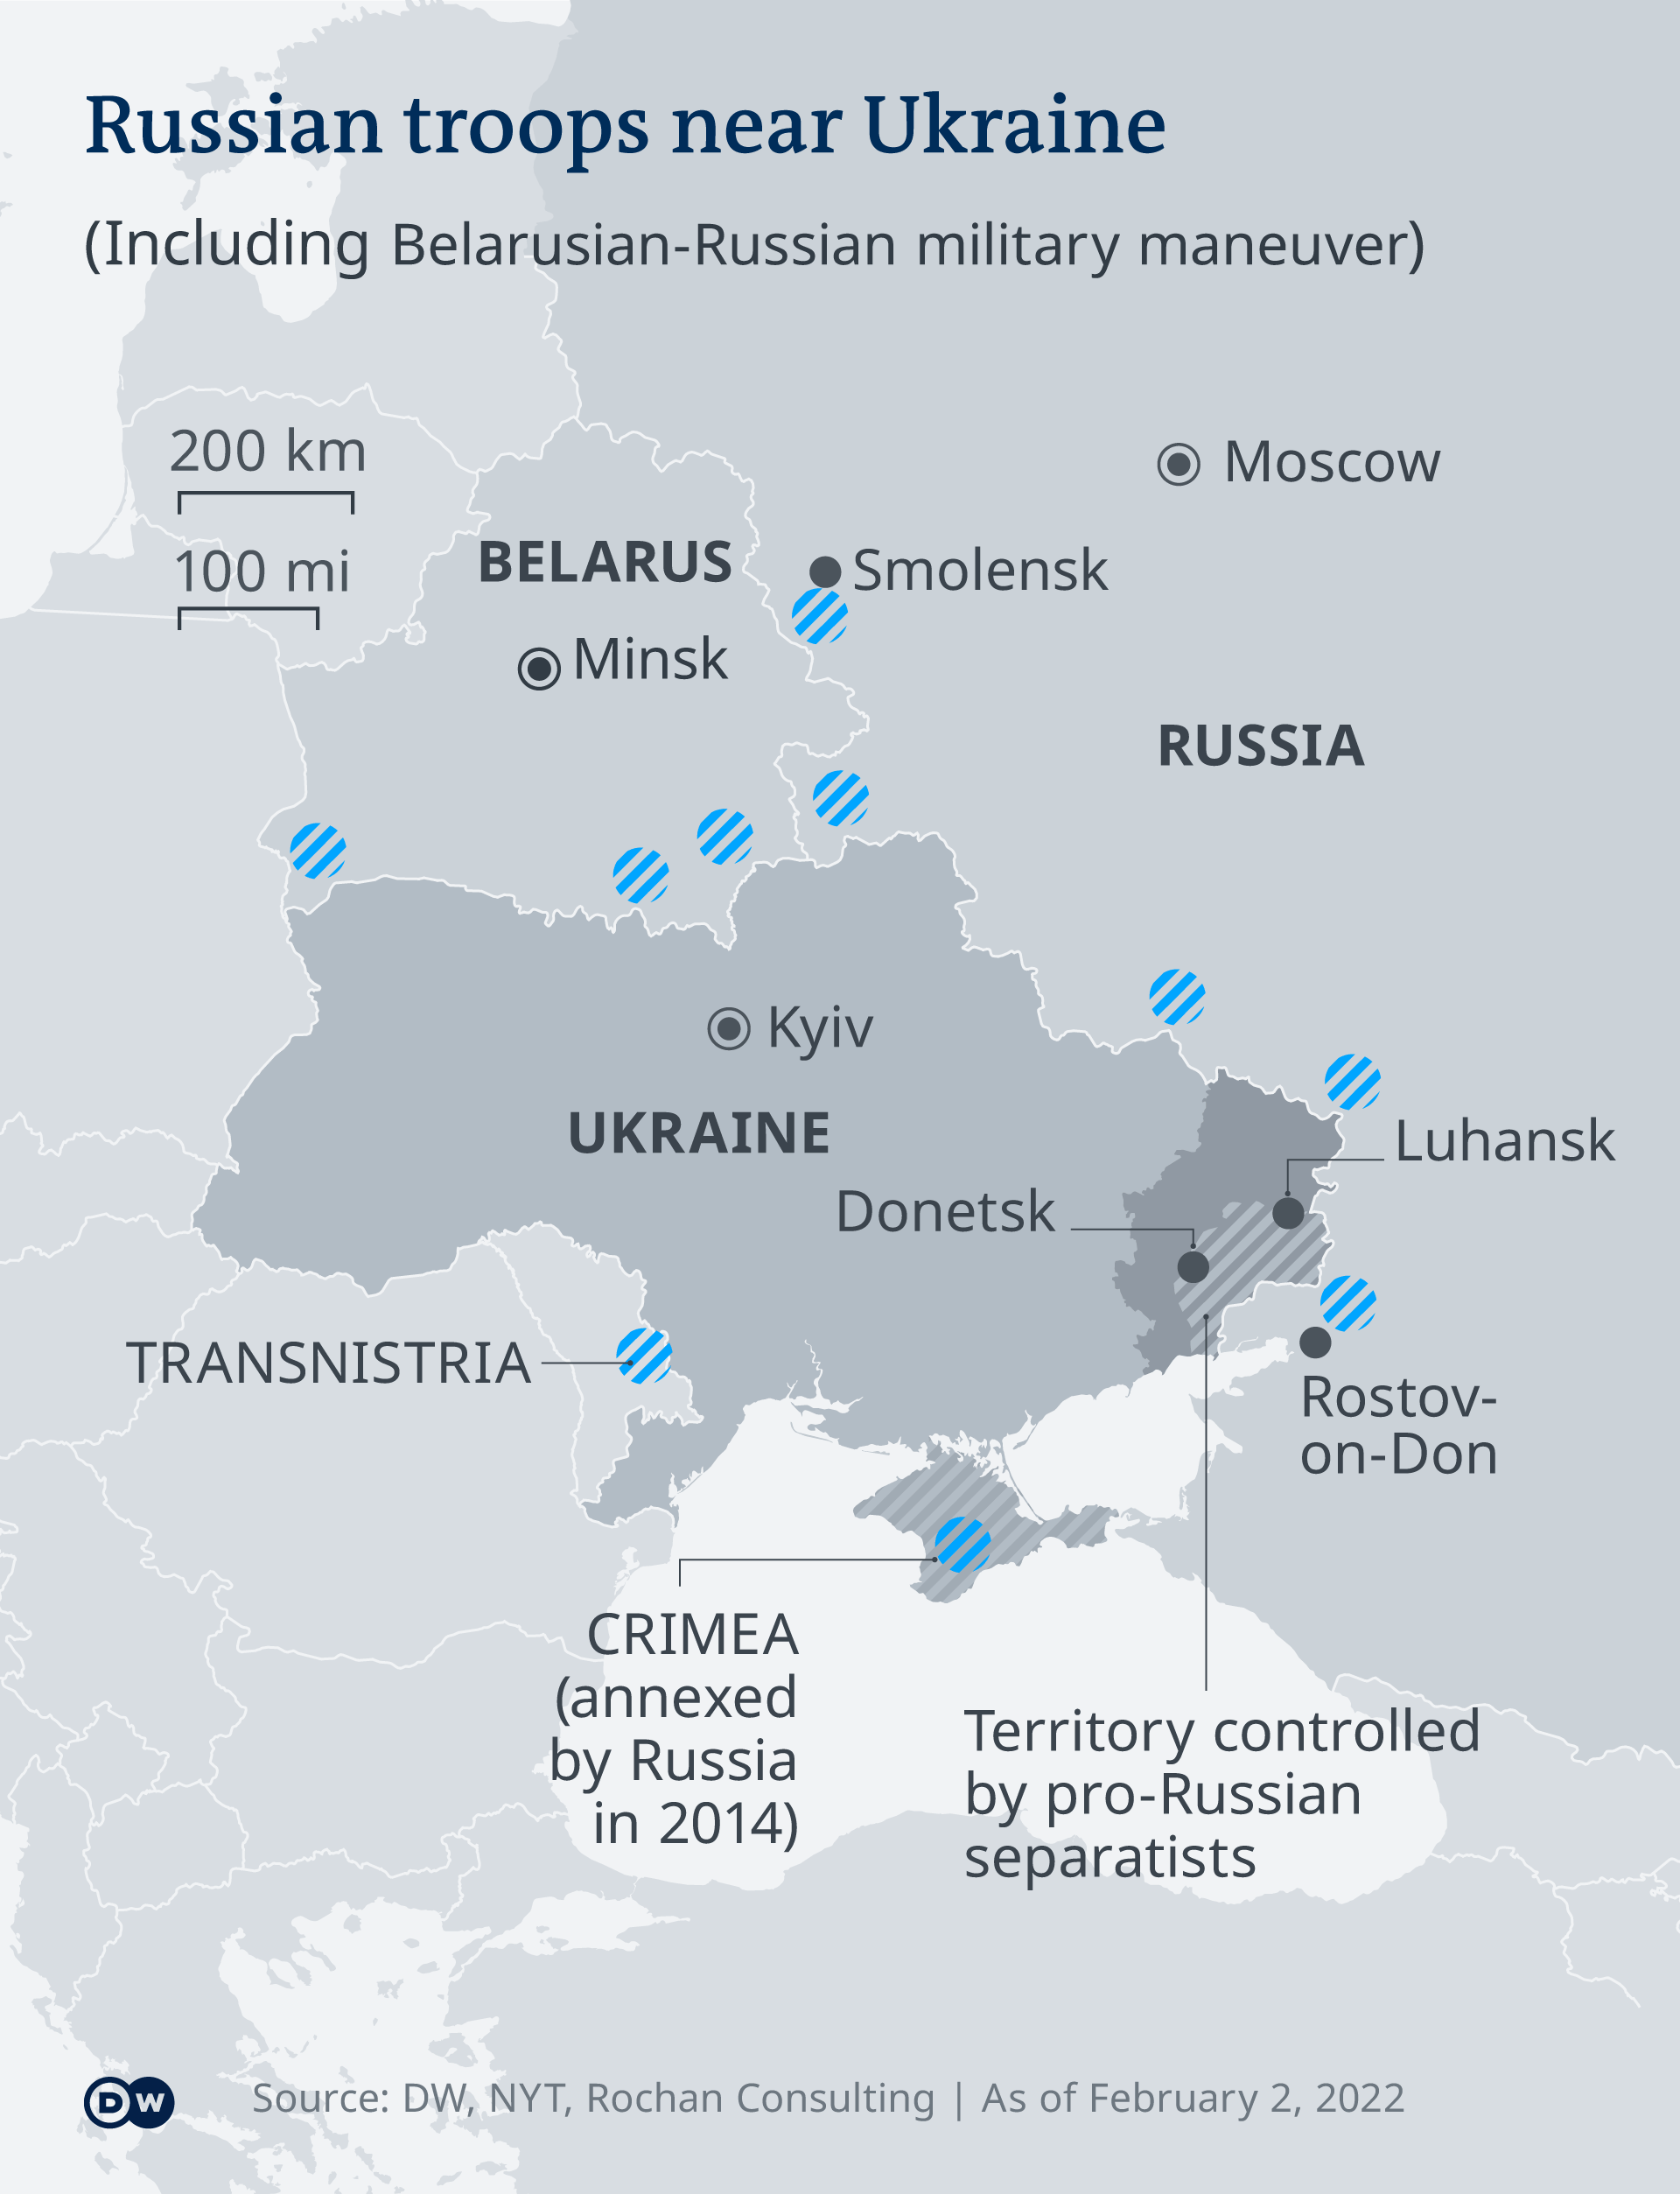 A map of Ukraine showing where Russian troops are deployed